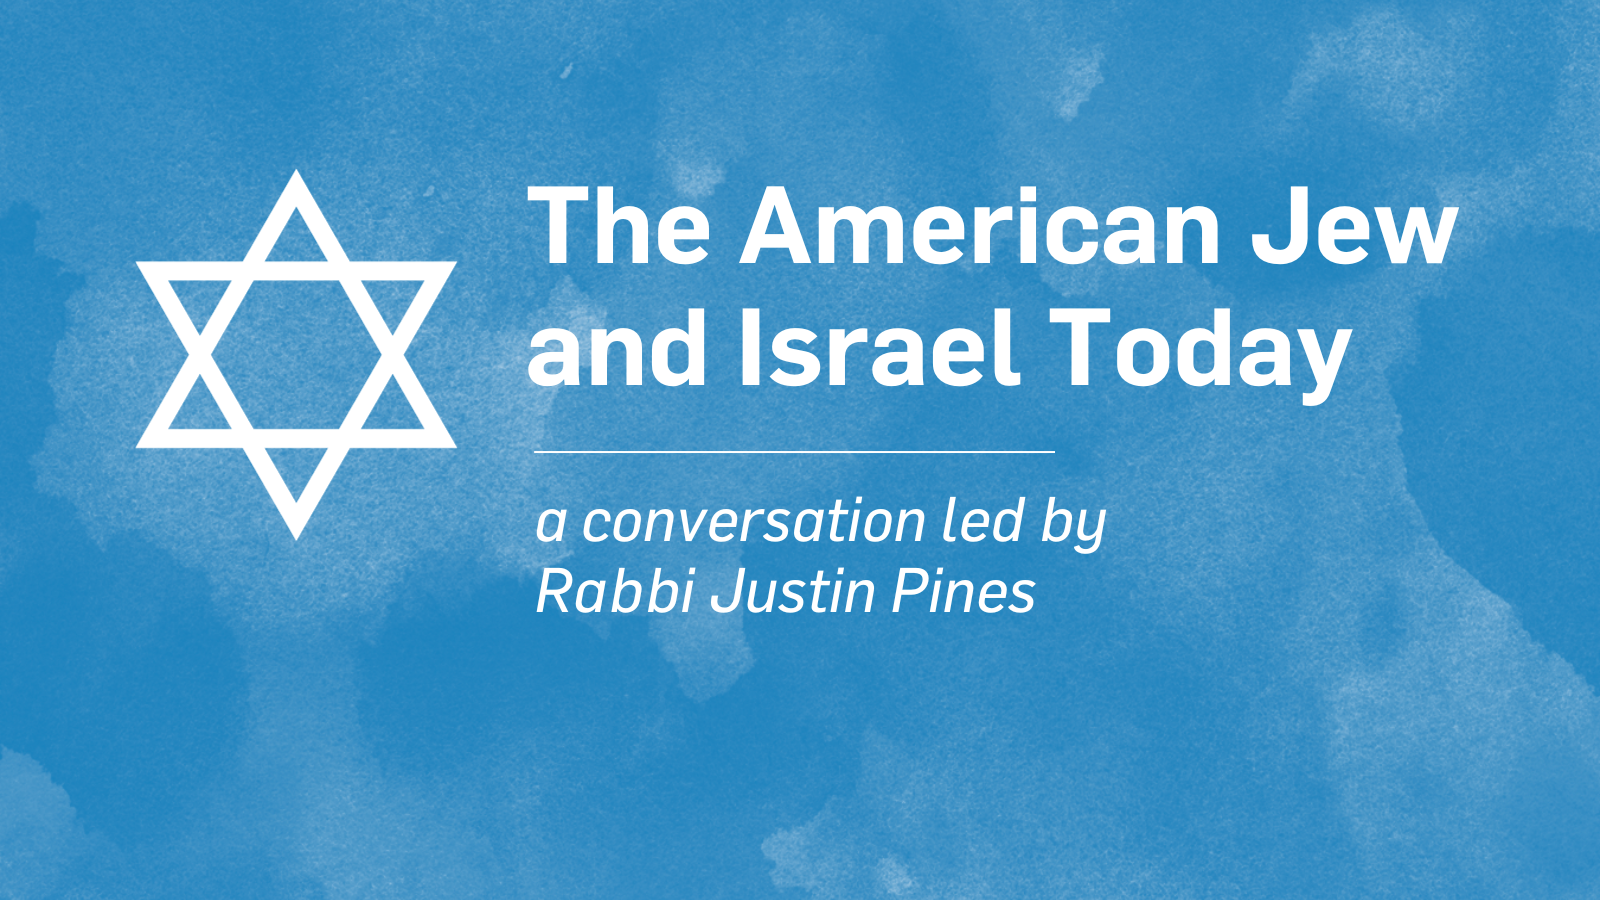 Home-Hosted Speaker Event: The American Jew and Israel Today